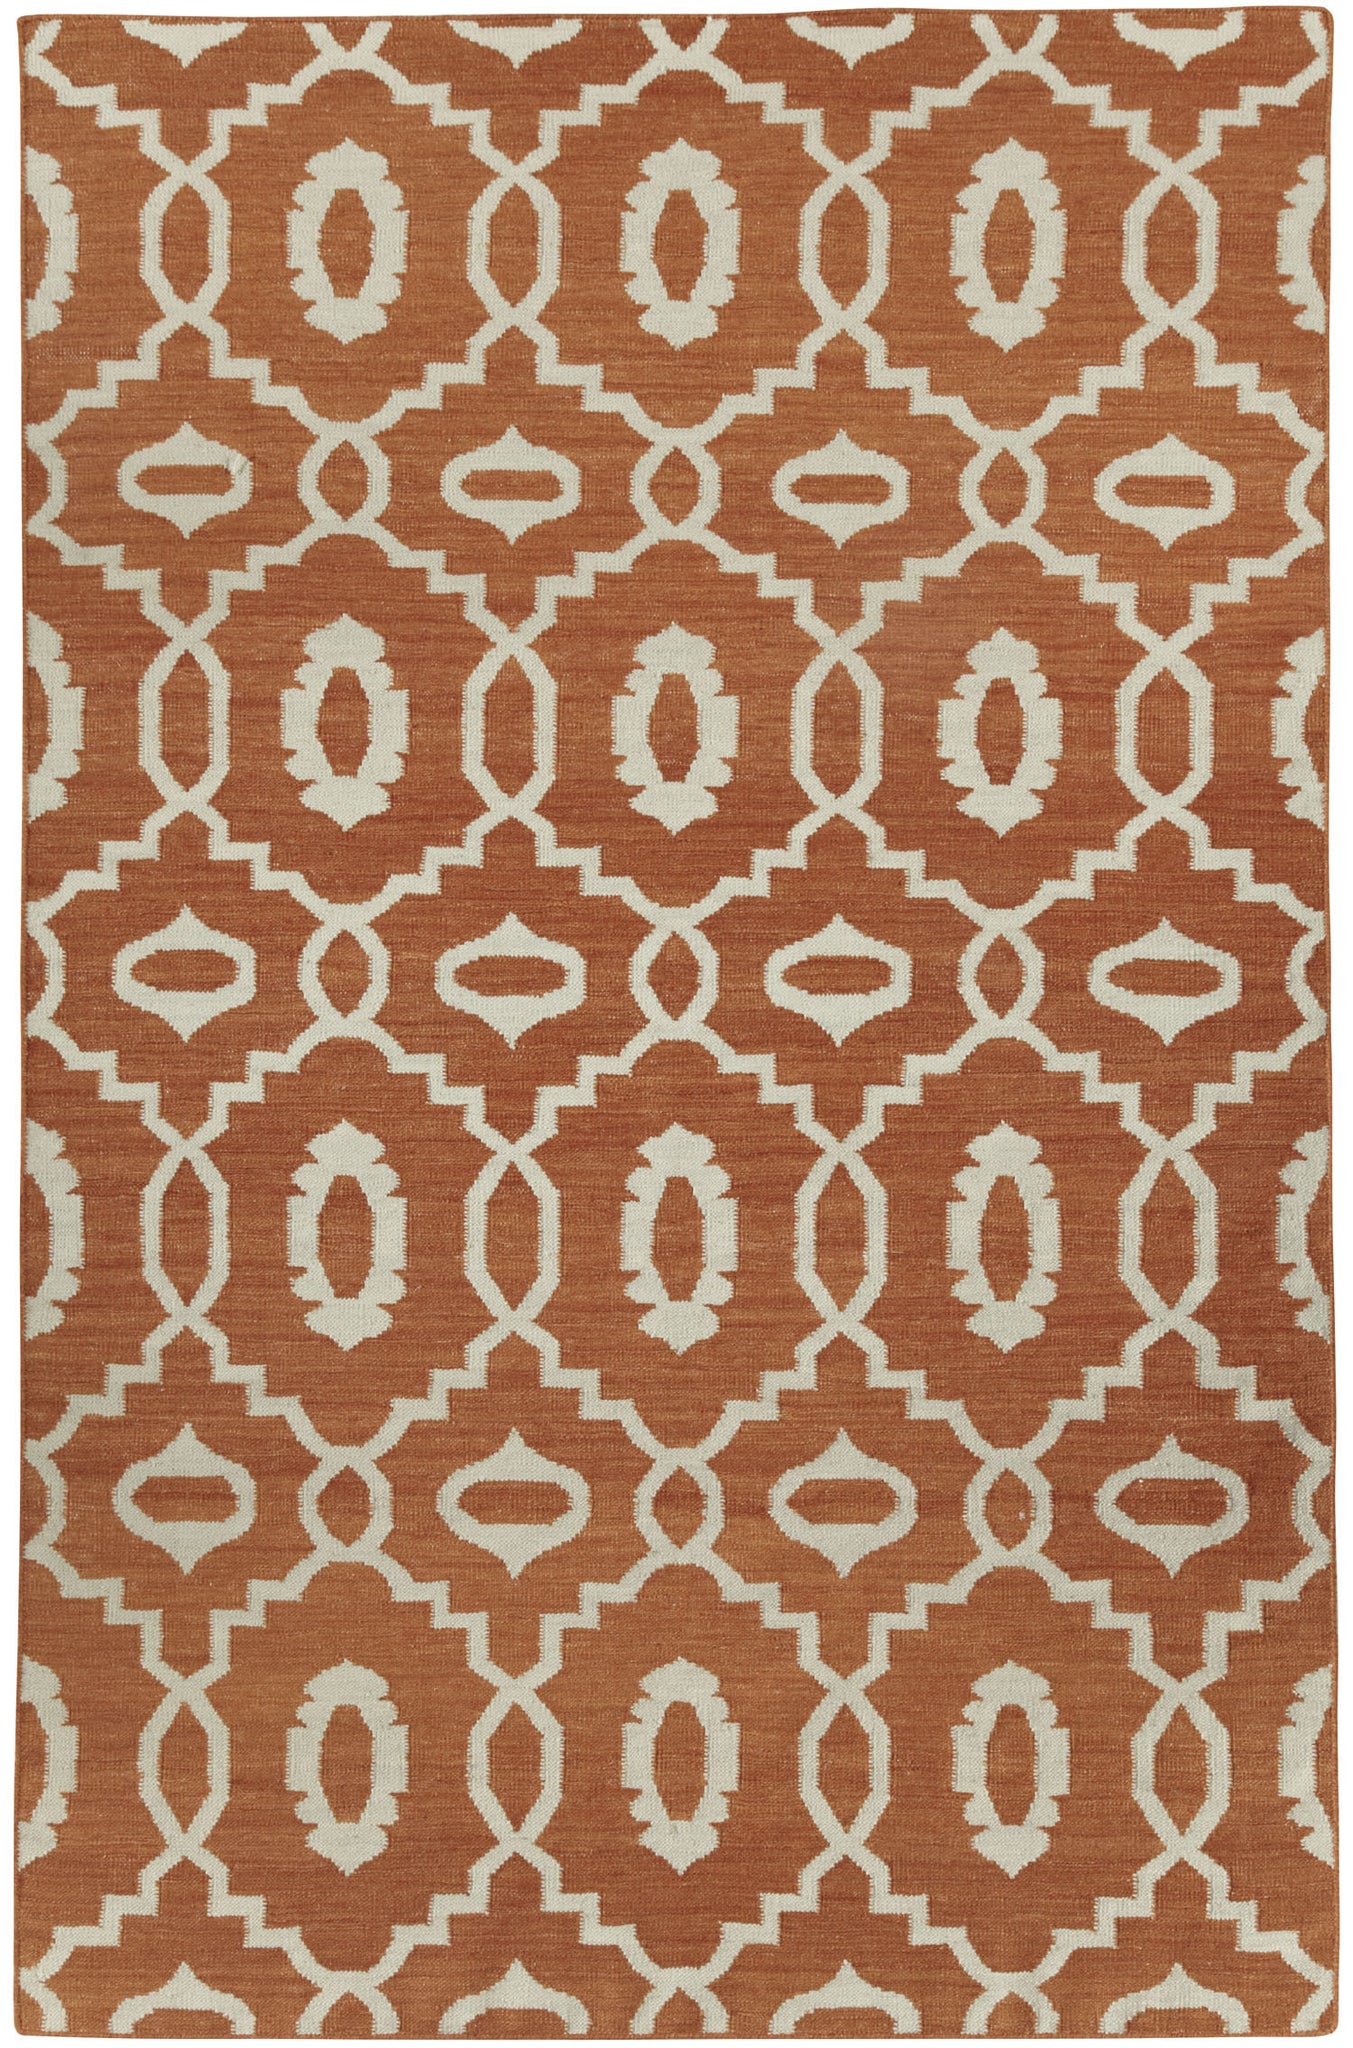 Capel Anchor 3628 Sunny 875 Area Rug by Genevieve Gorder main image